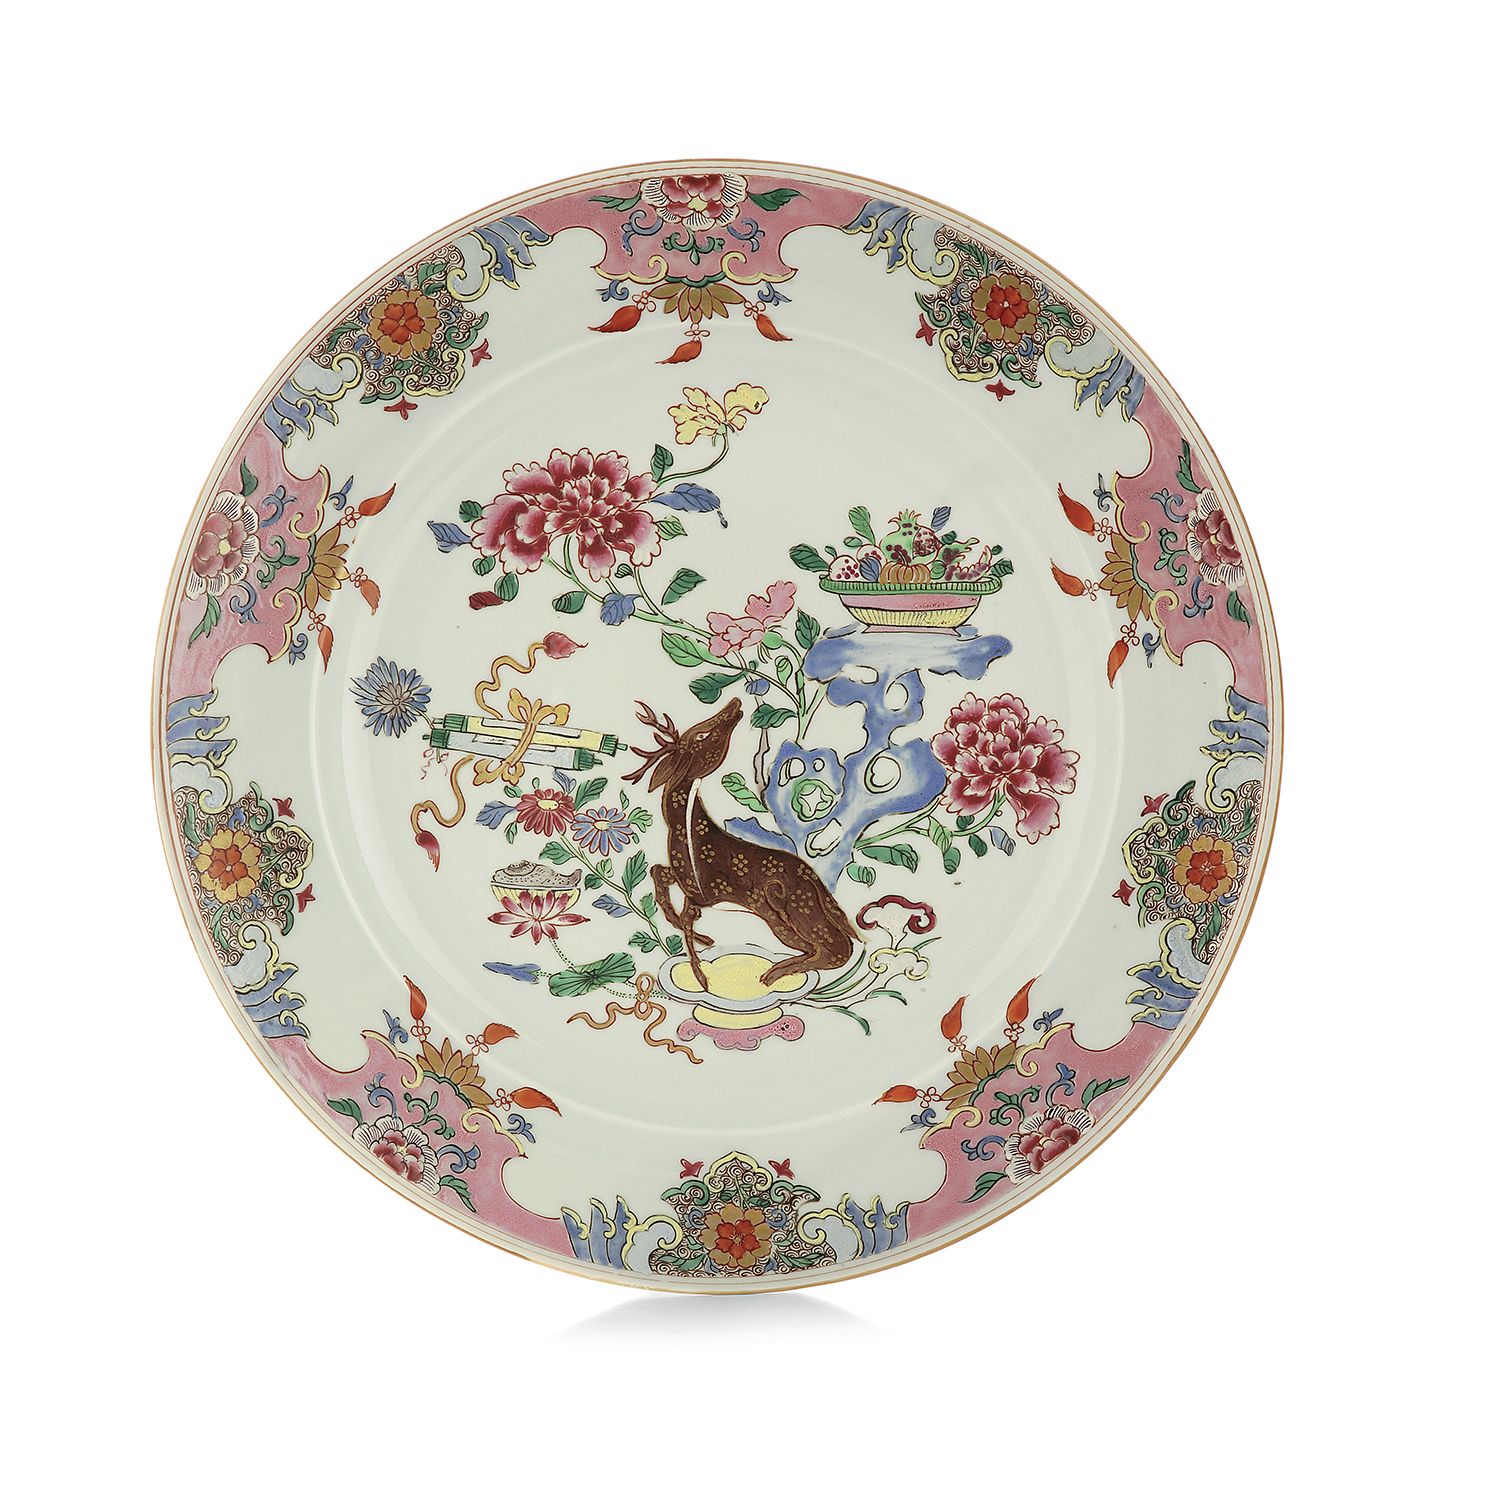 Null ROUND PLAT, SAMSON, 19th CENTURY

A round porcelain dish in the style of th&hellip;